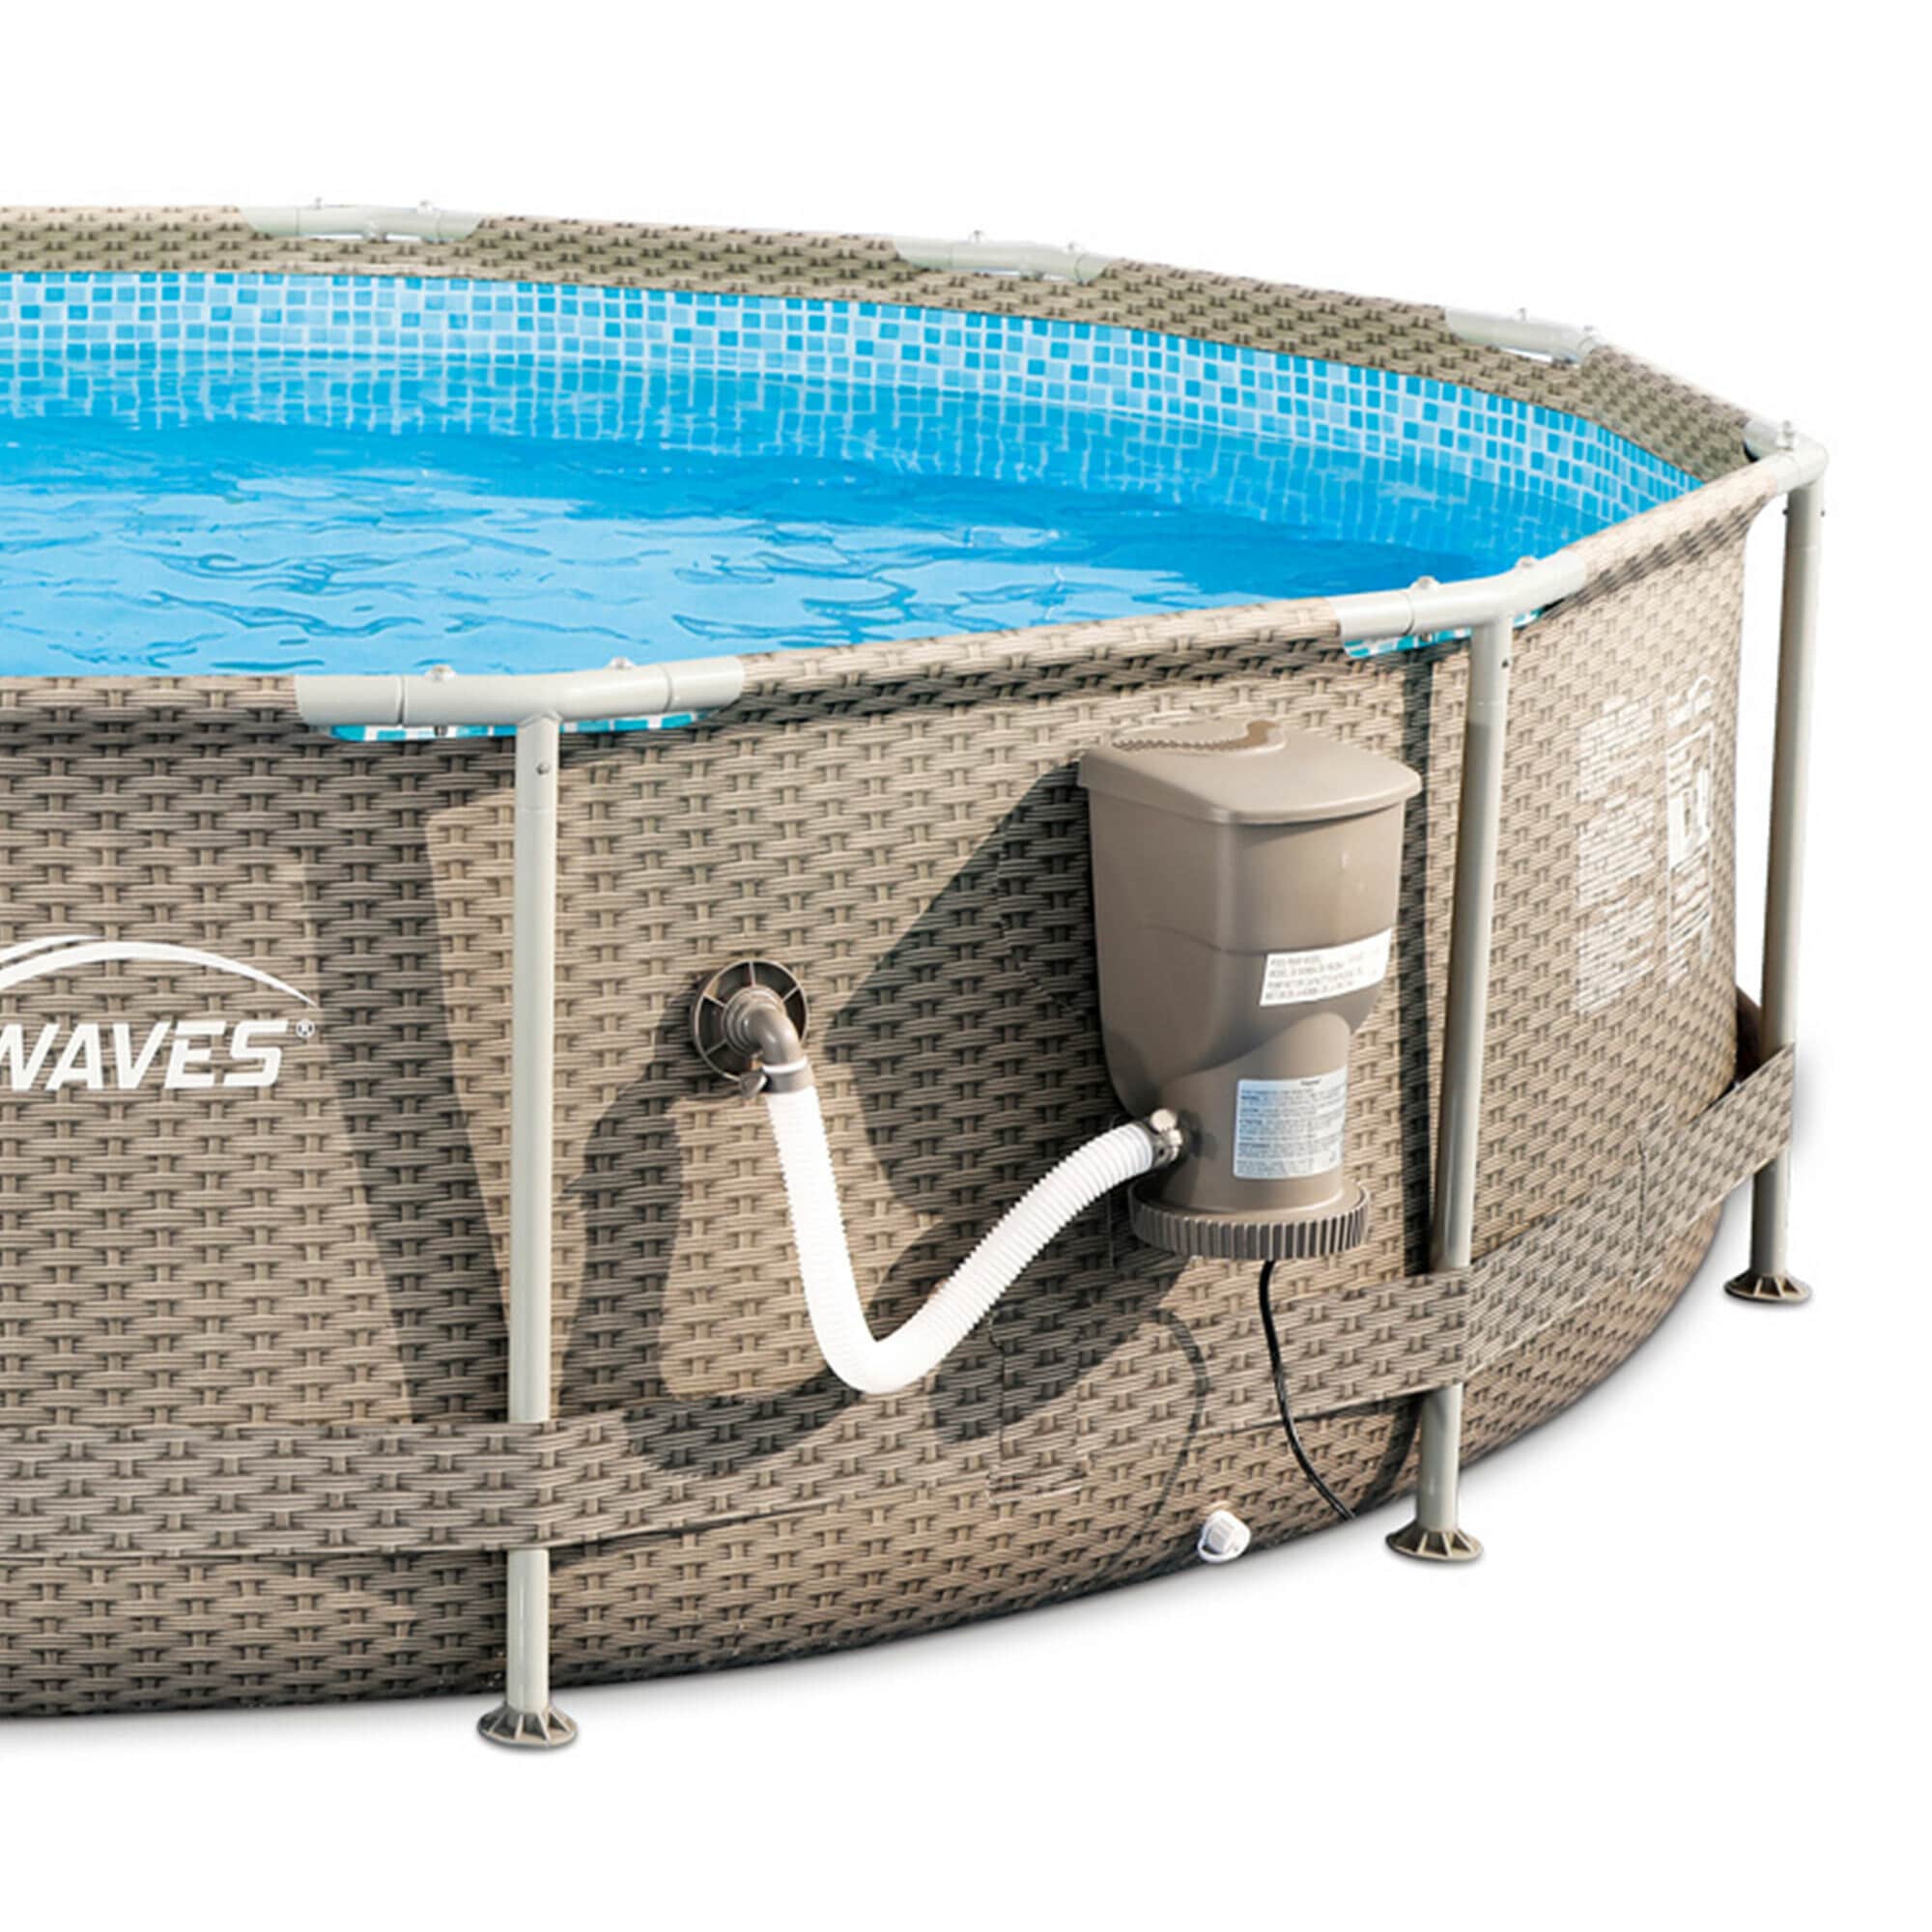 Summer Waves 12-ft x with Frame 12-ft 30-in x Round Pump at Metal Pool Above-Ground Filter